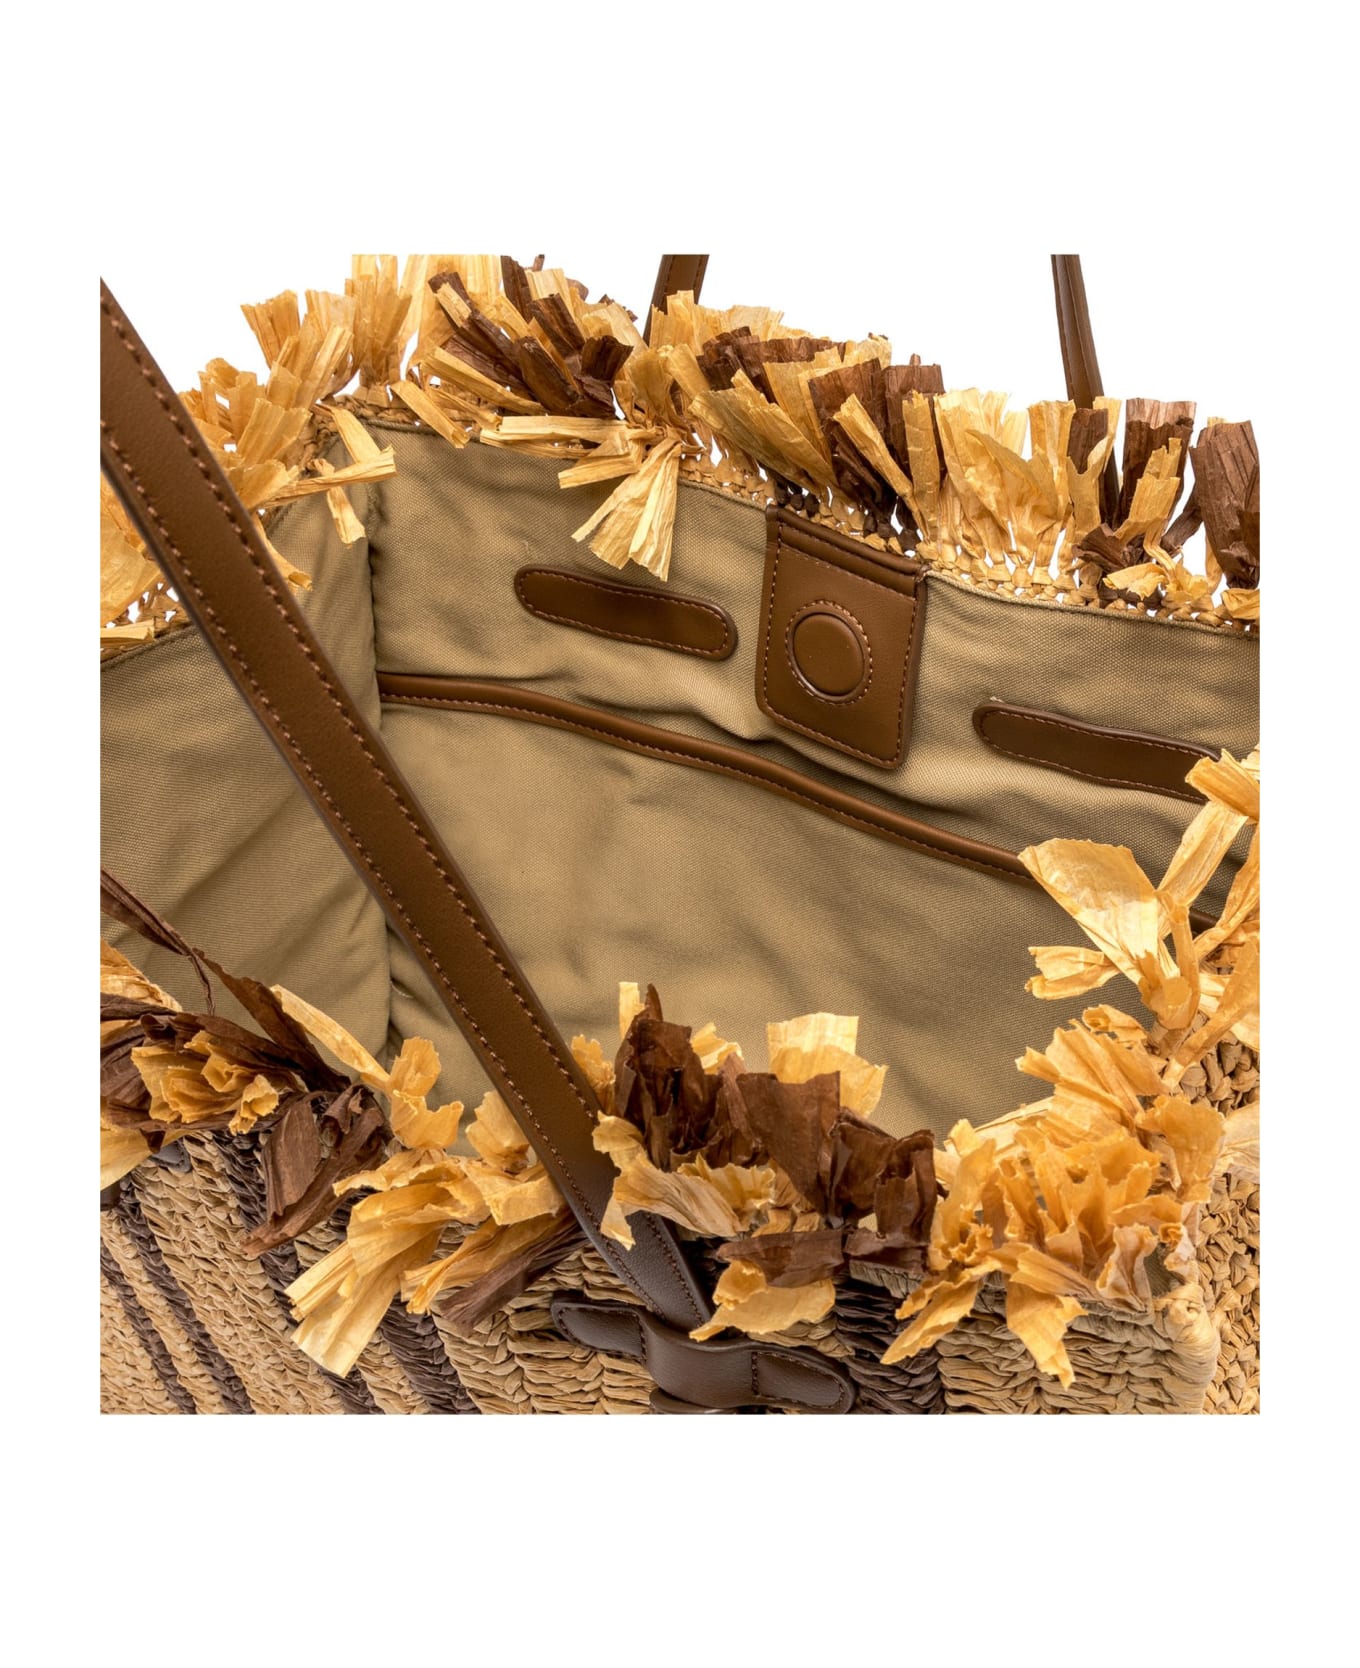 Gianni Chiarini Shopping Bag Is Made Of Straw-effect Material - Brown